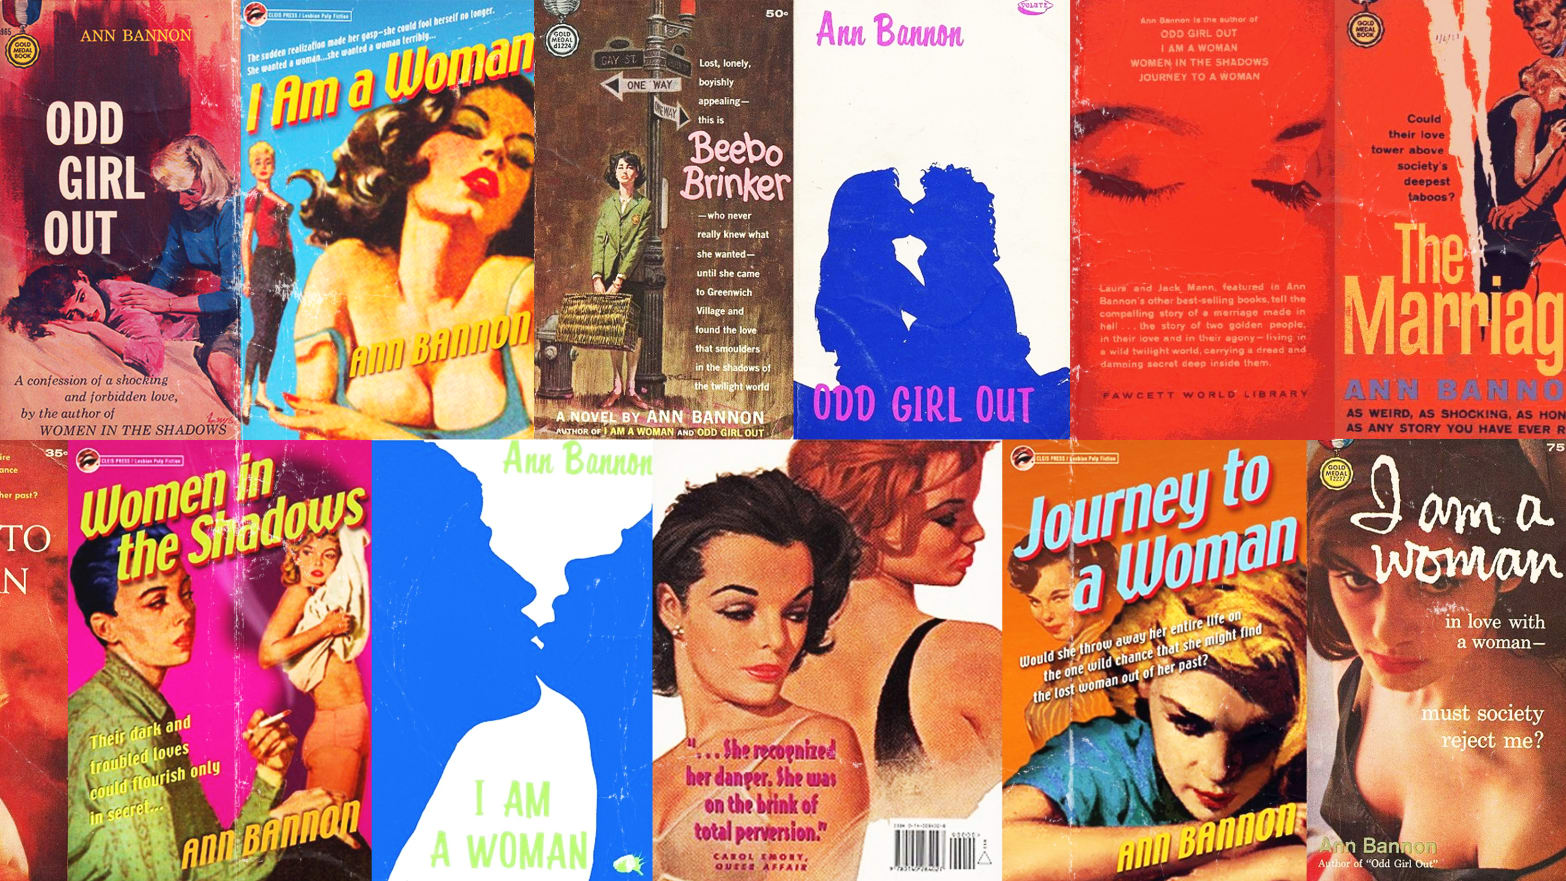 Ann Bannon, the Queen of Lesbian Pulp Fiction, Reveals Her Own Amazing Story pic pic